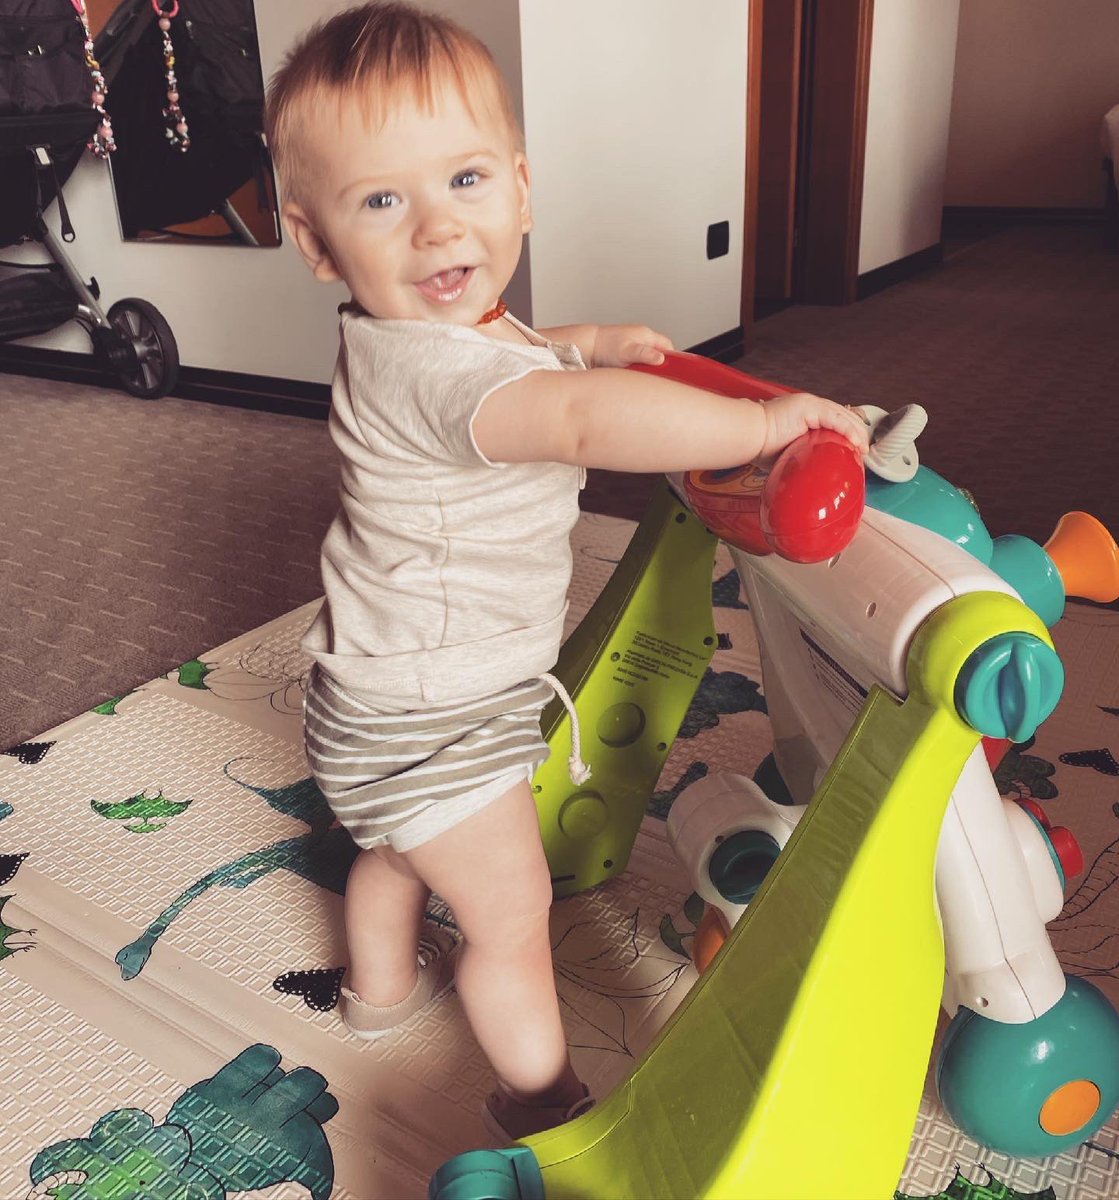 Just look at me go! I’m pulling up to things, crawling, and sitting all on my own! I’m into everything and keeping Mommy on her toes. Did I mention that Mommy loves every minute of it, and hopes it never stops? #saveollie